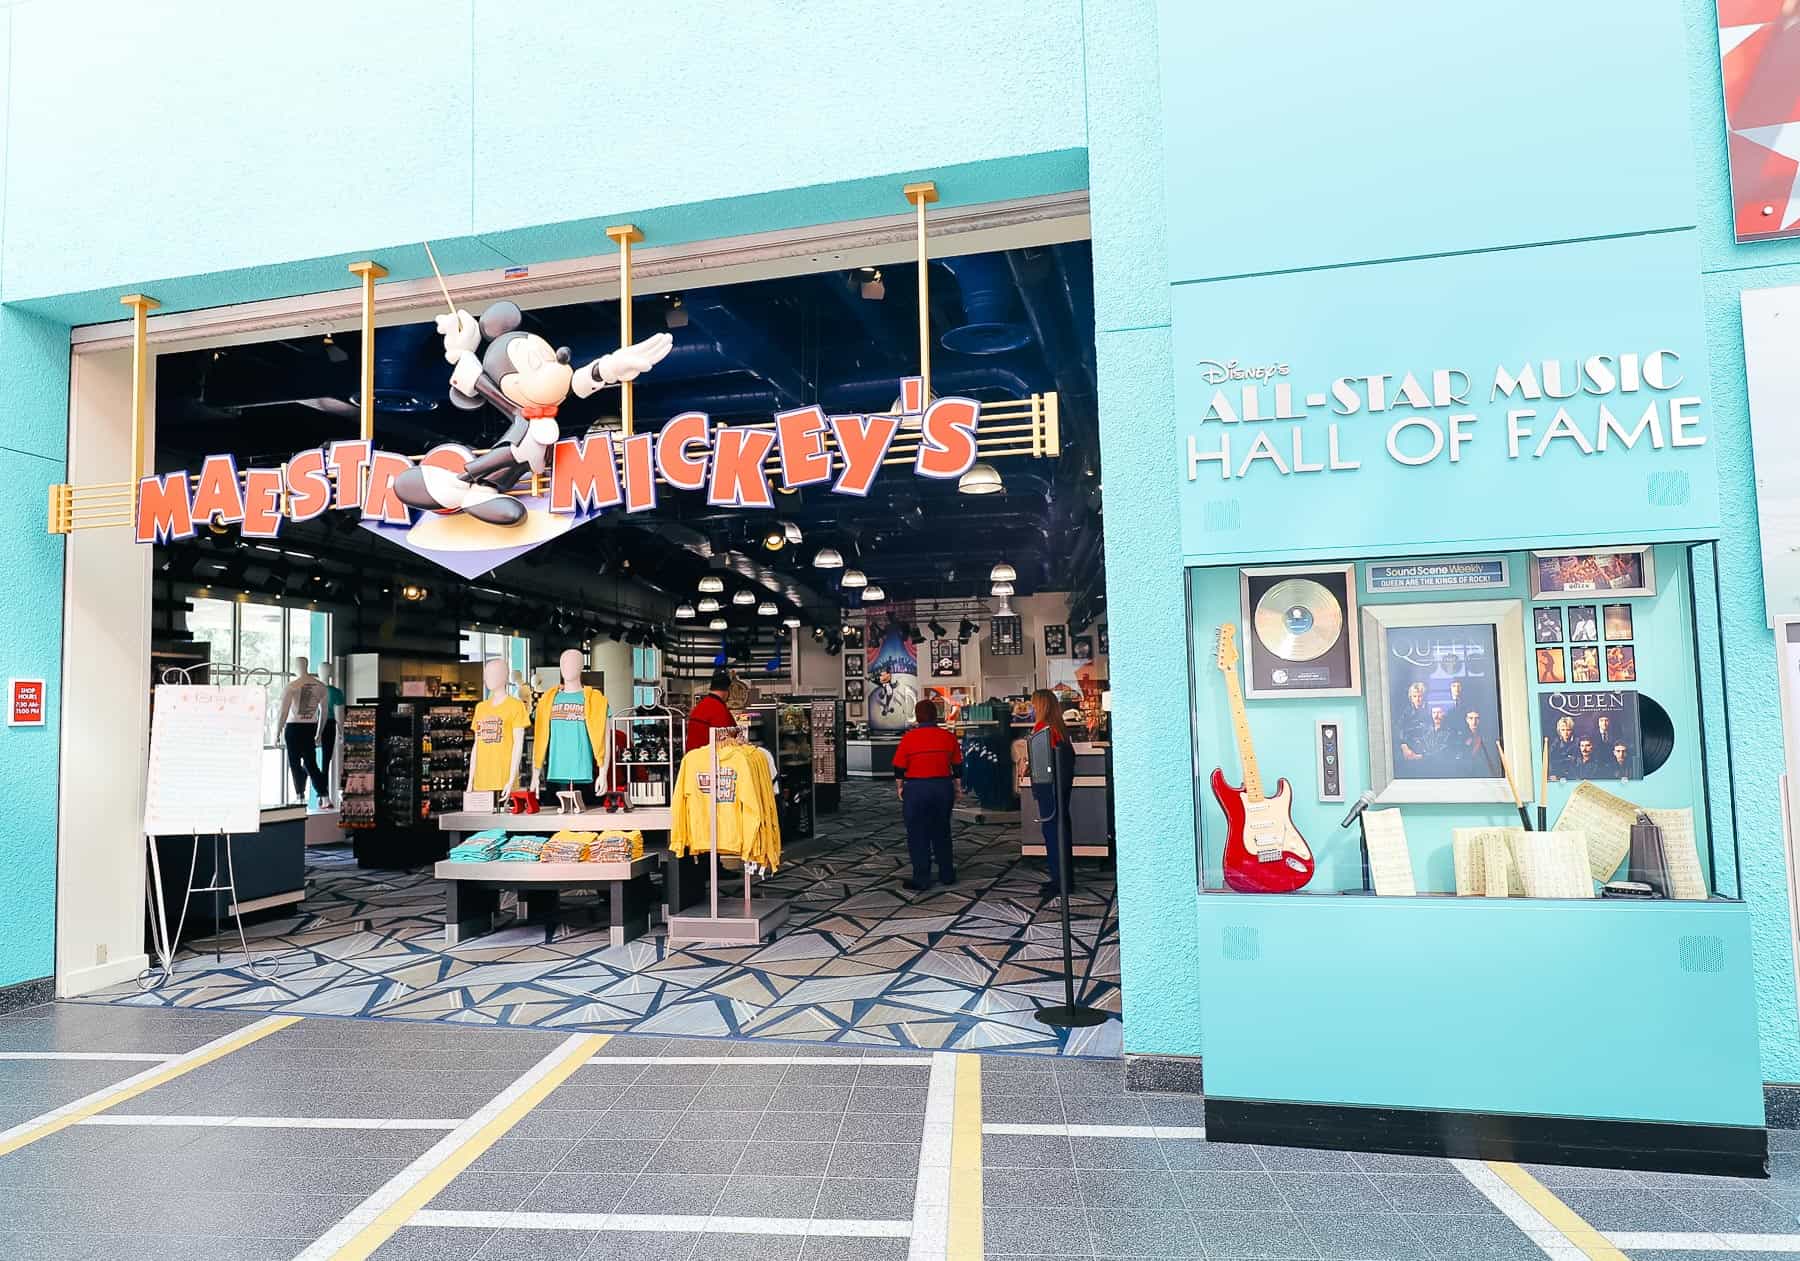 Maestro Mickey's signage and entrance to gift shop 